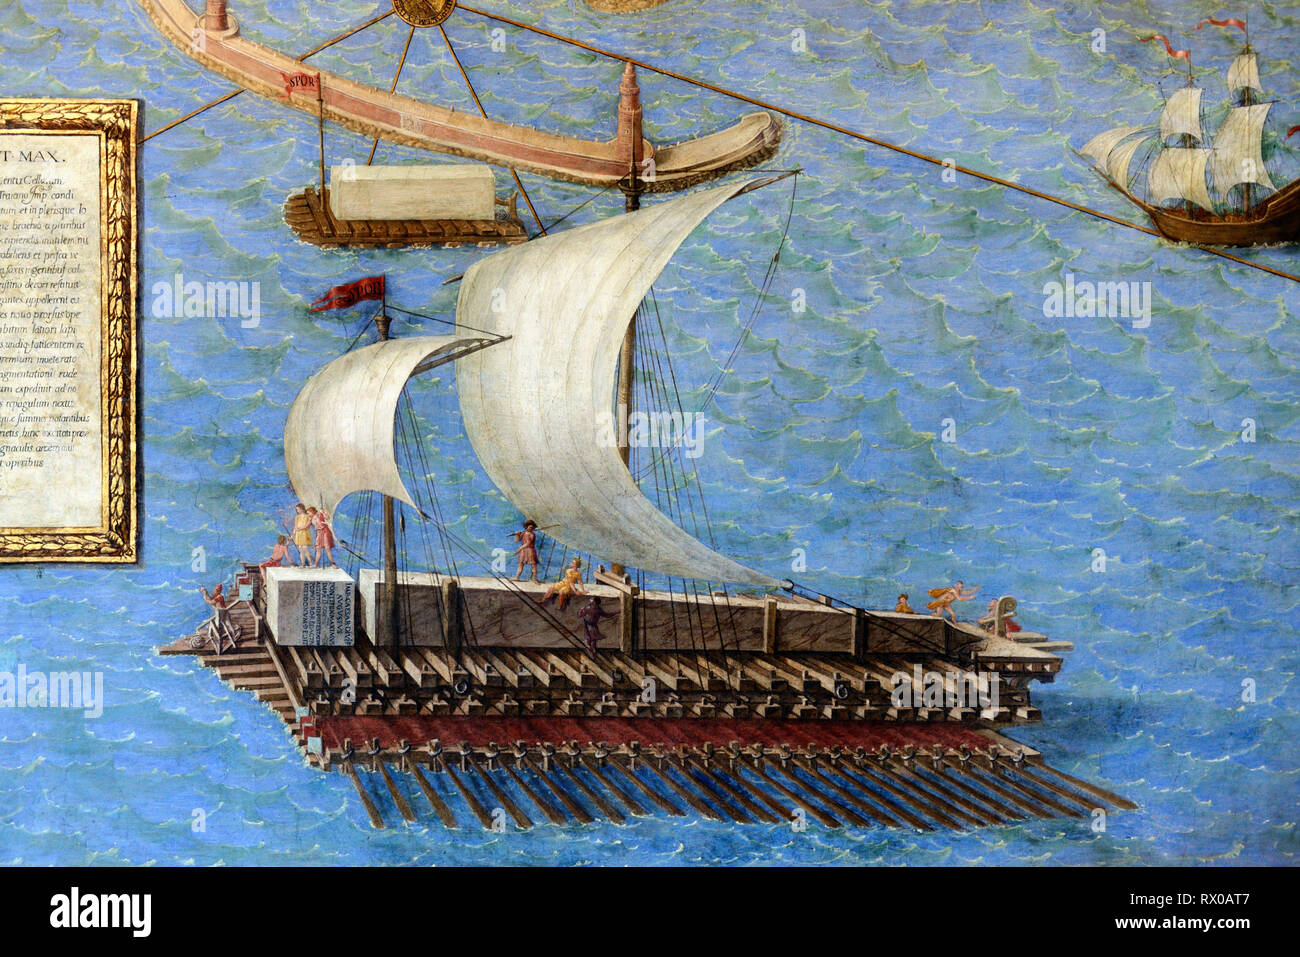 Roman Ship or Roman Galley Fresco or Wall Painting in Gallery of Maps Vatican Museums Stock Photo